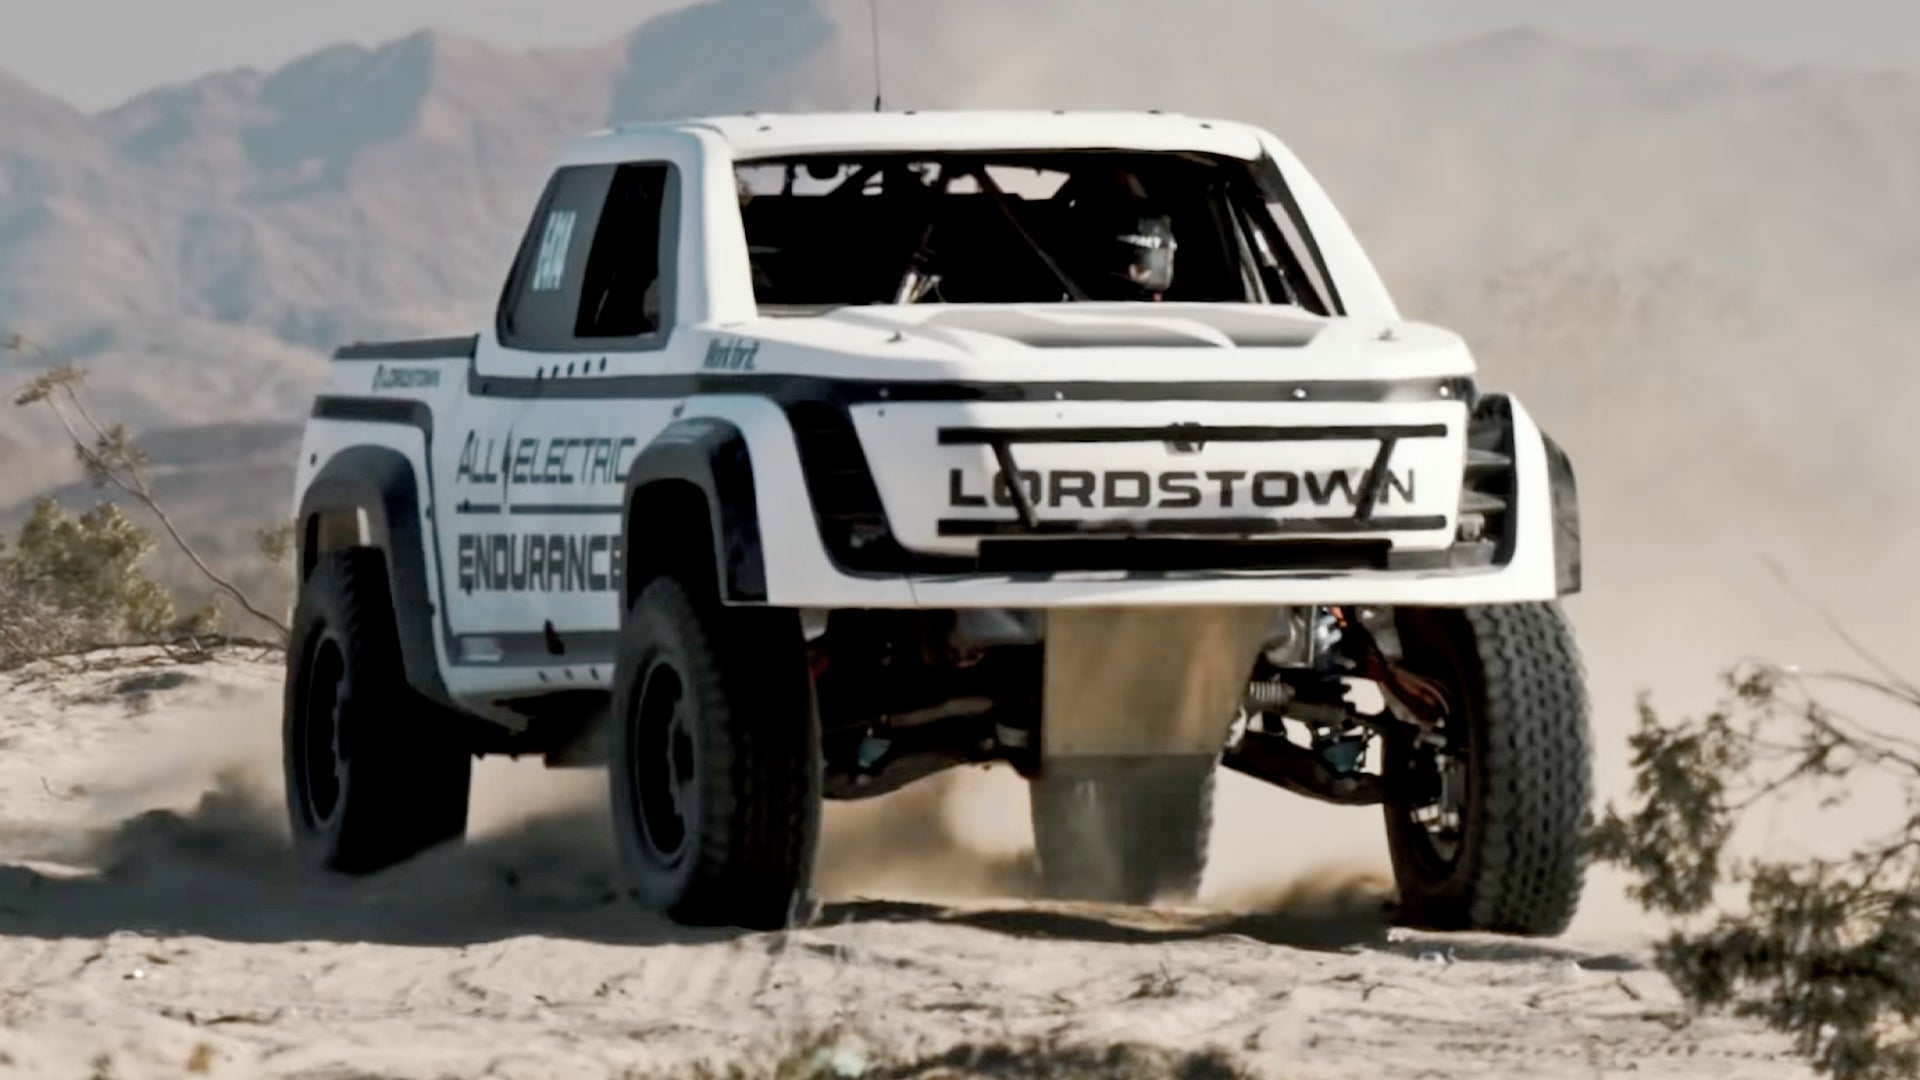 2021 Lordstown Endurance Race Truck in the sand